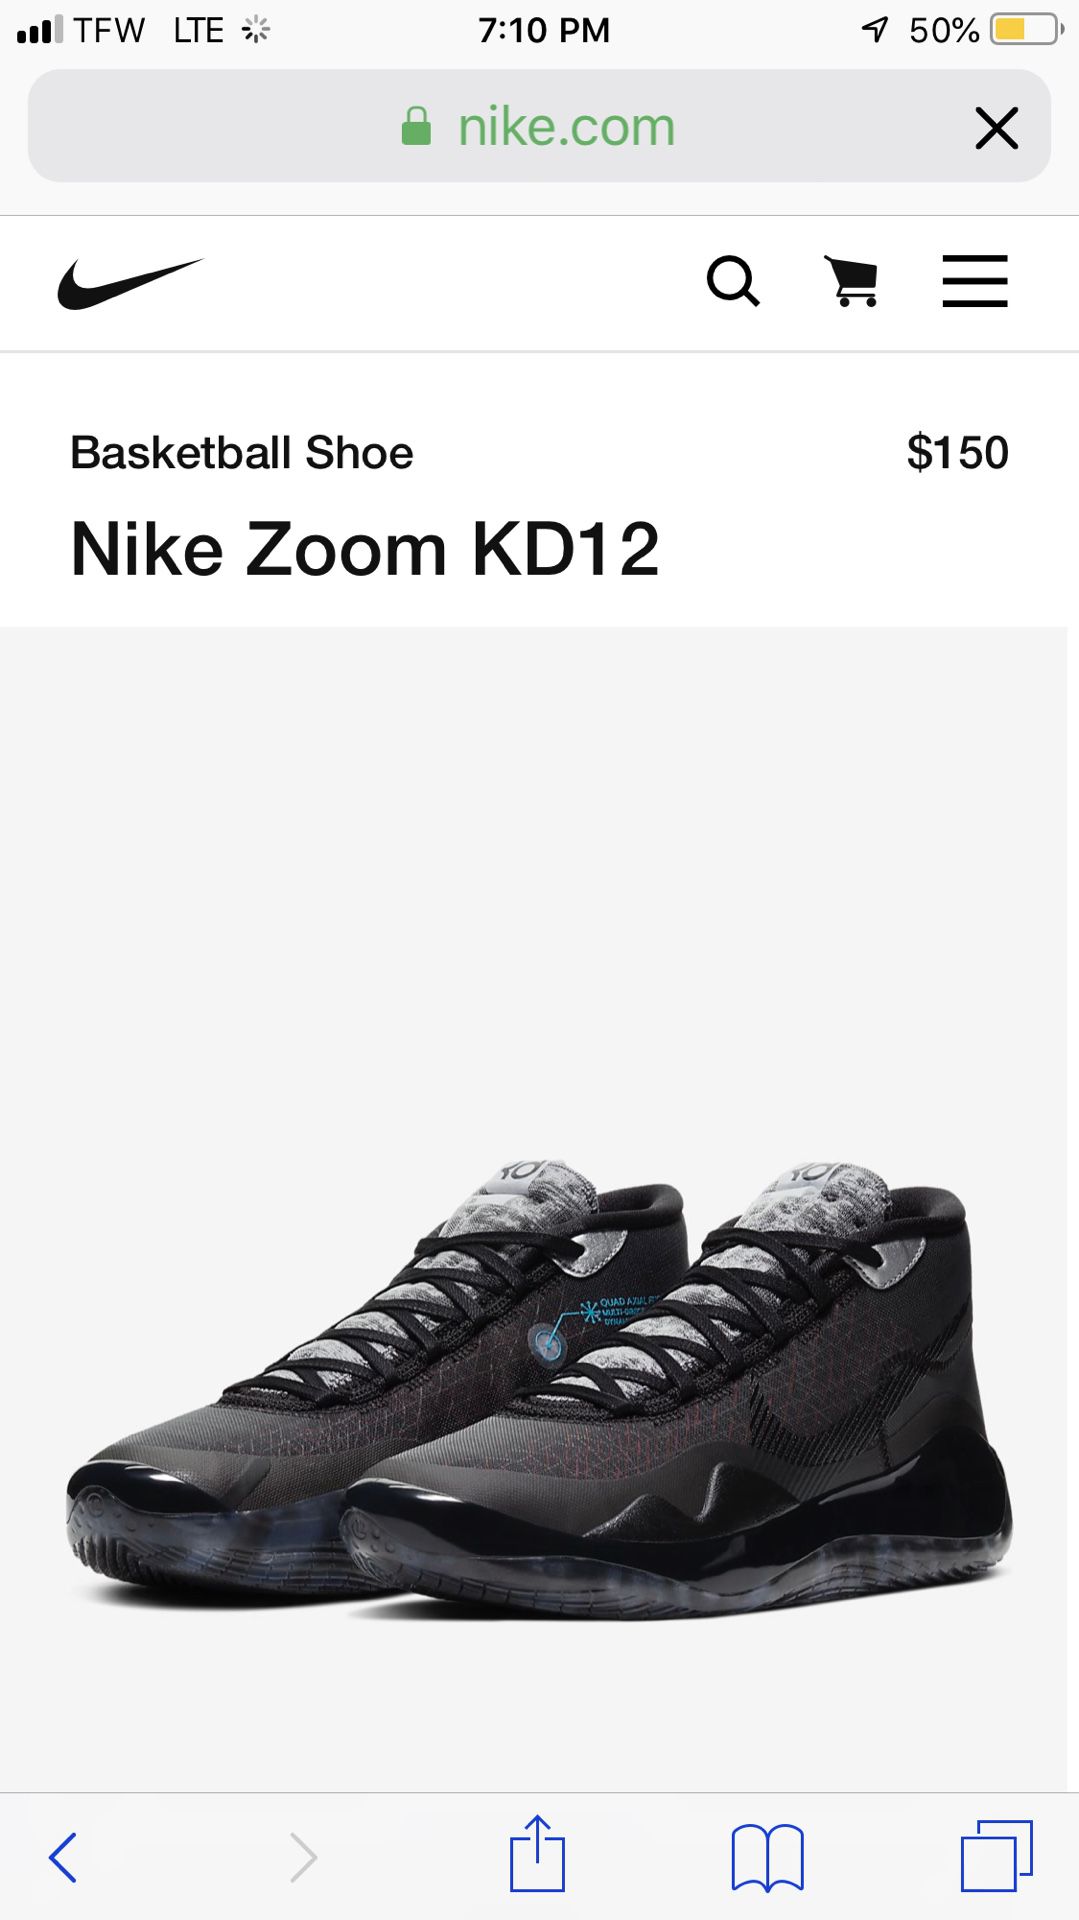 Nike Zoom KD12 -Brand New in Box -size 9.5 but I can exchange for dif size if needed